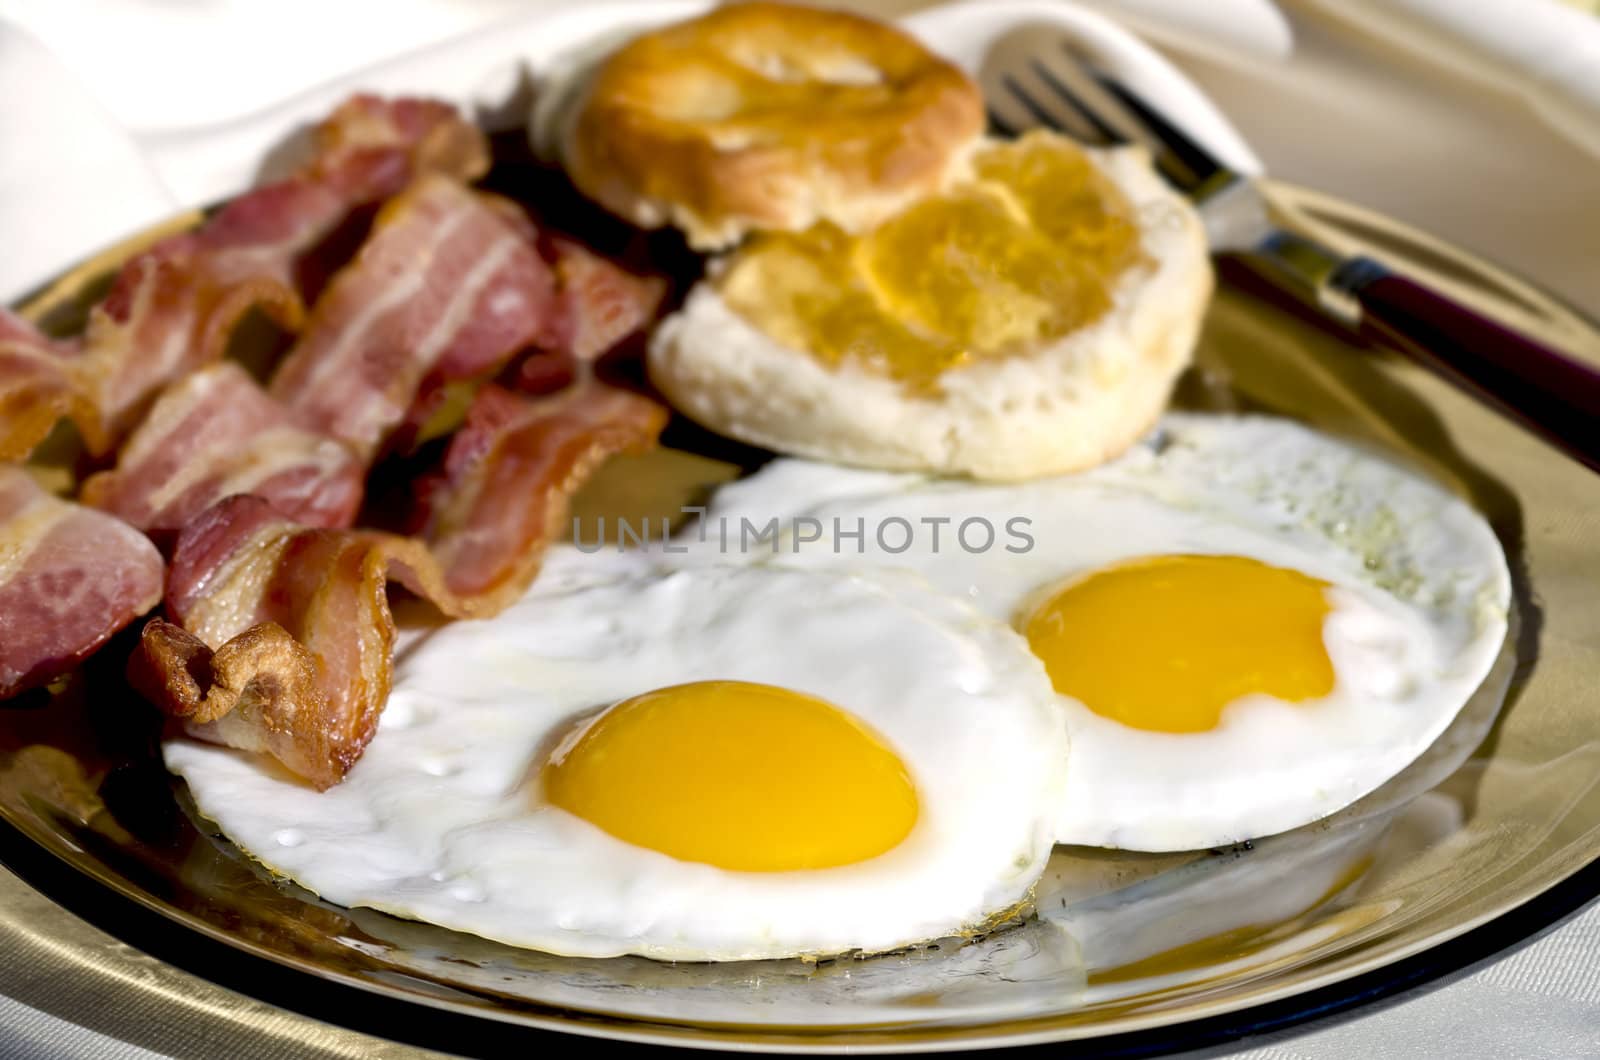 Breakfast plate outside with eggs, bacon, and biscuits with apple jelly.